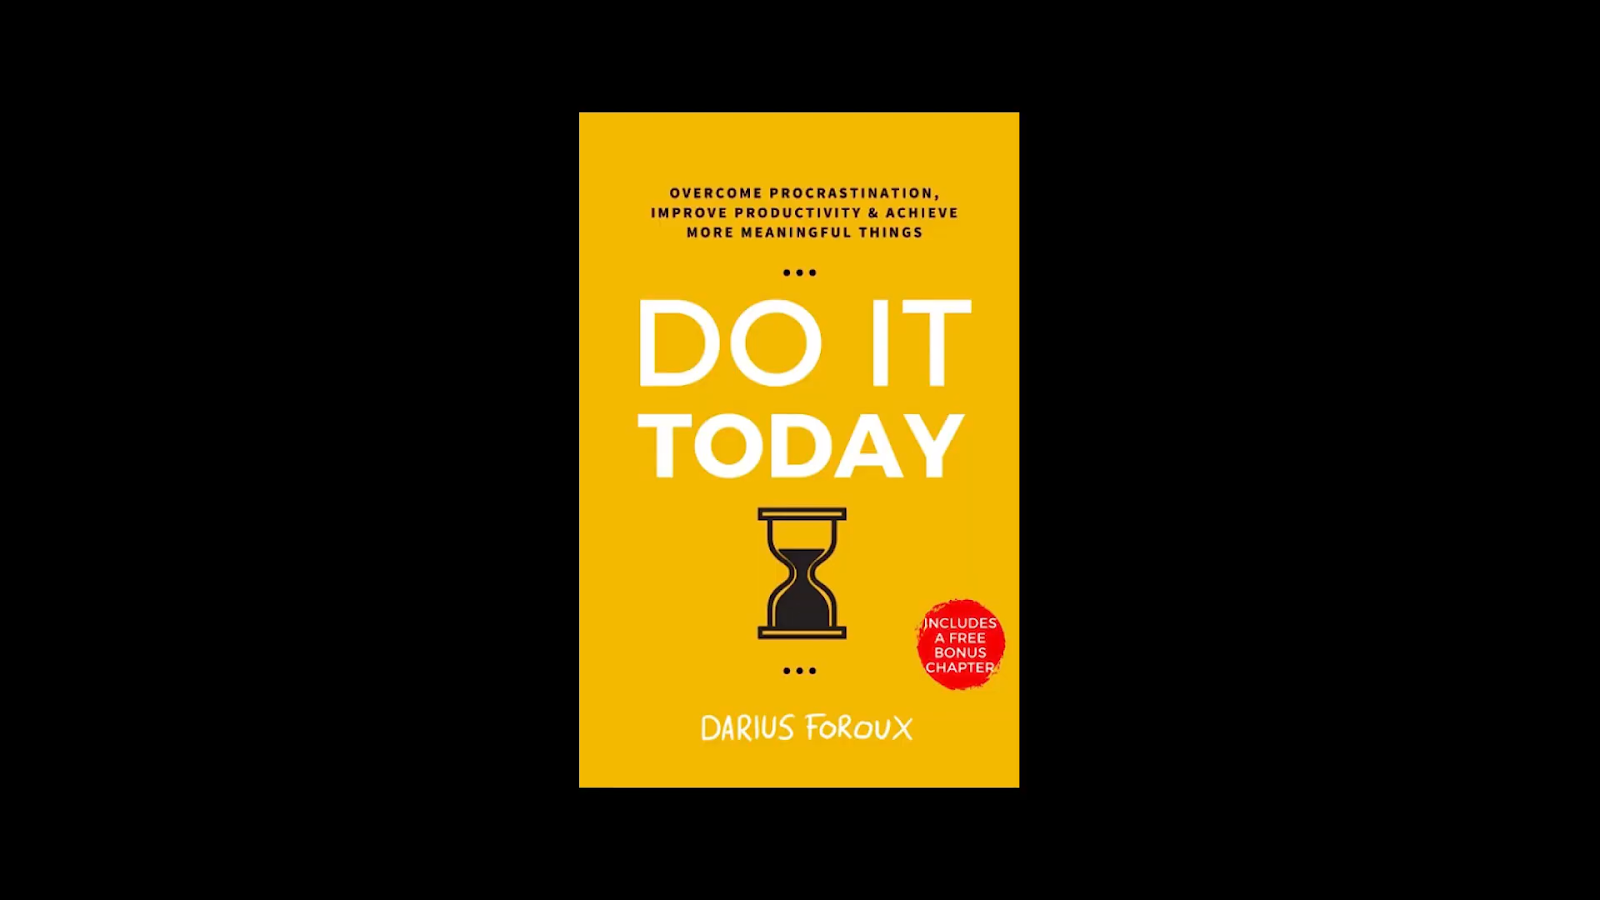 A book cover titled 'DO IT TODAY' with an hourglass icon